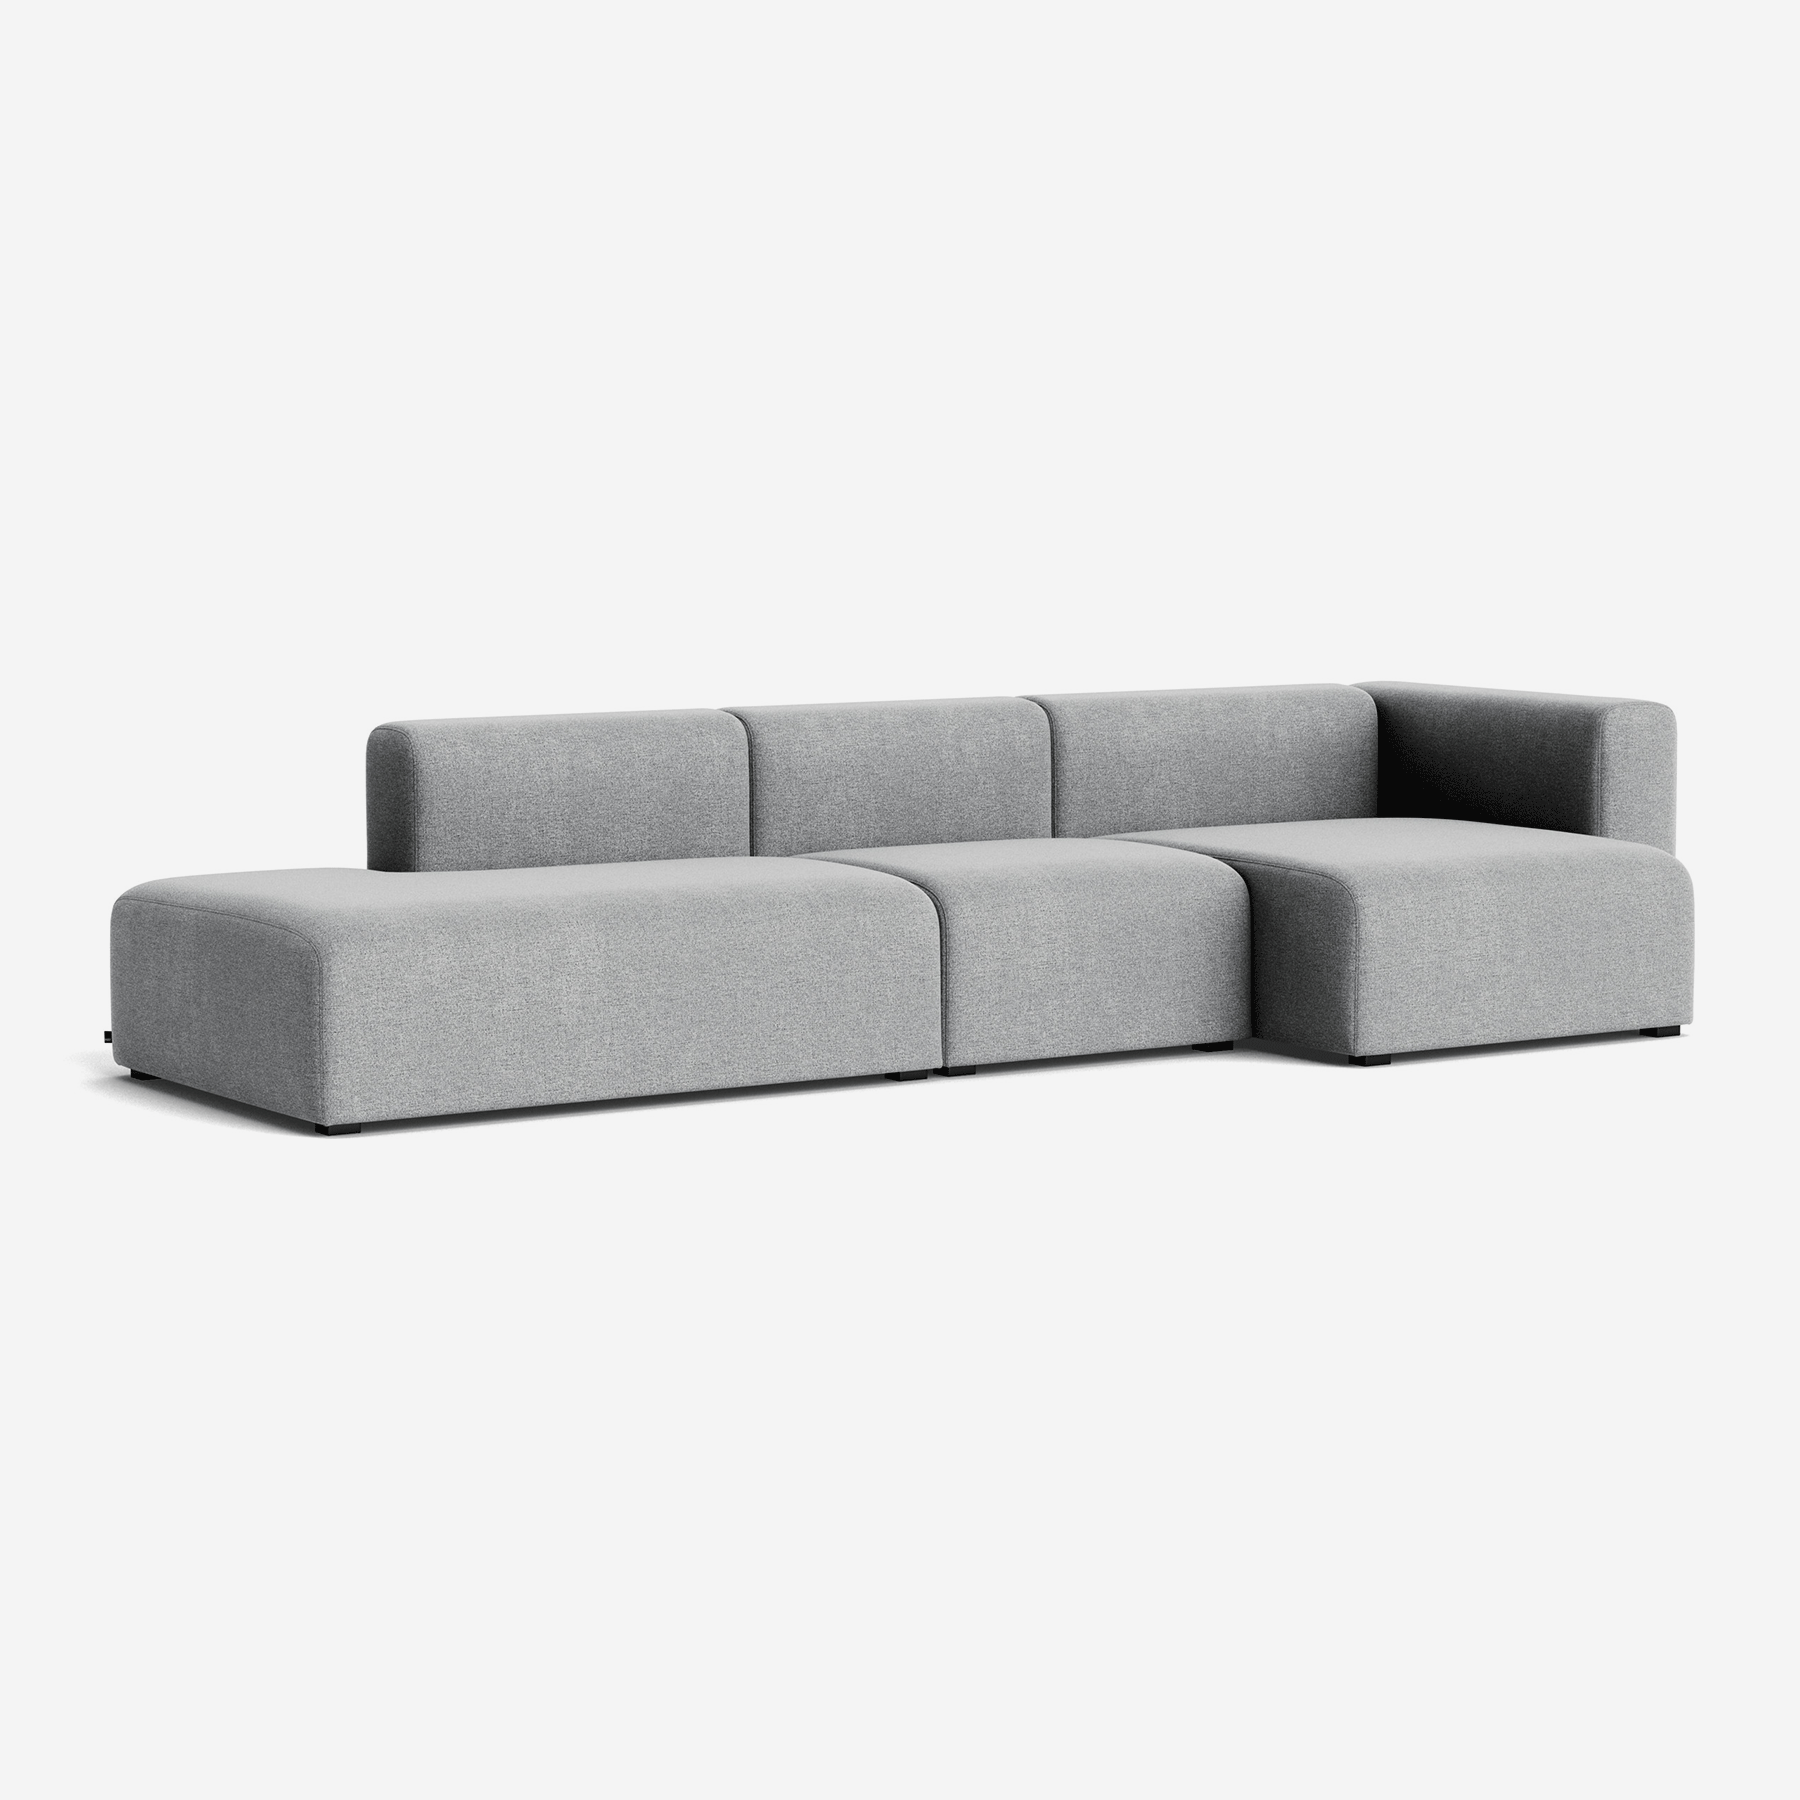 Mags 3 Seater Sofa, Combination 4